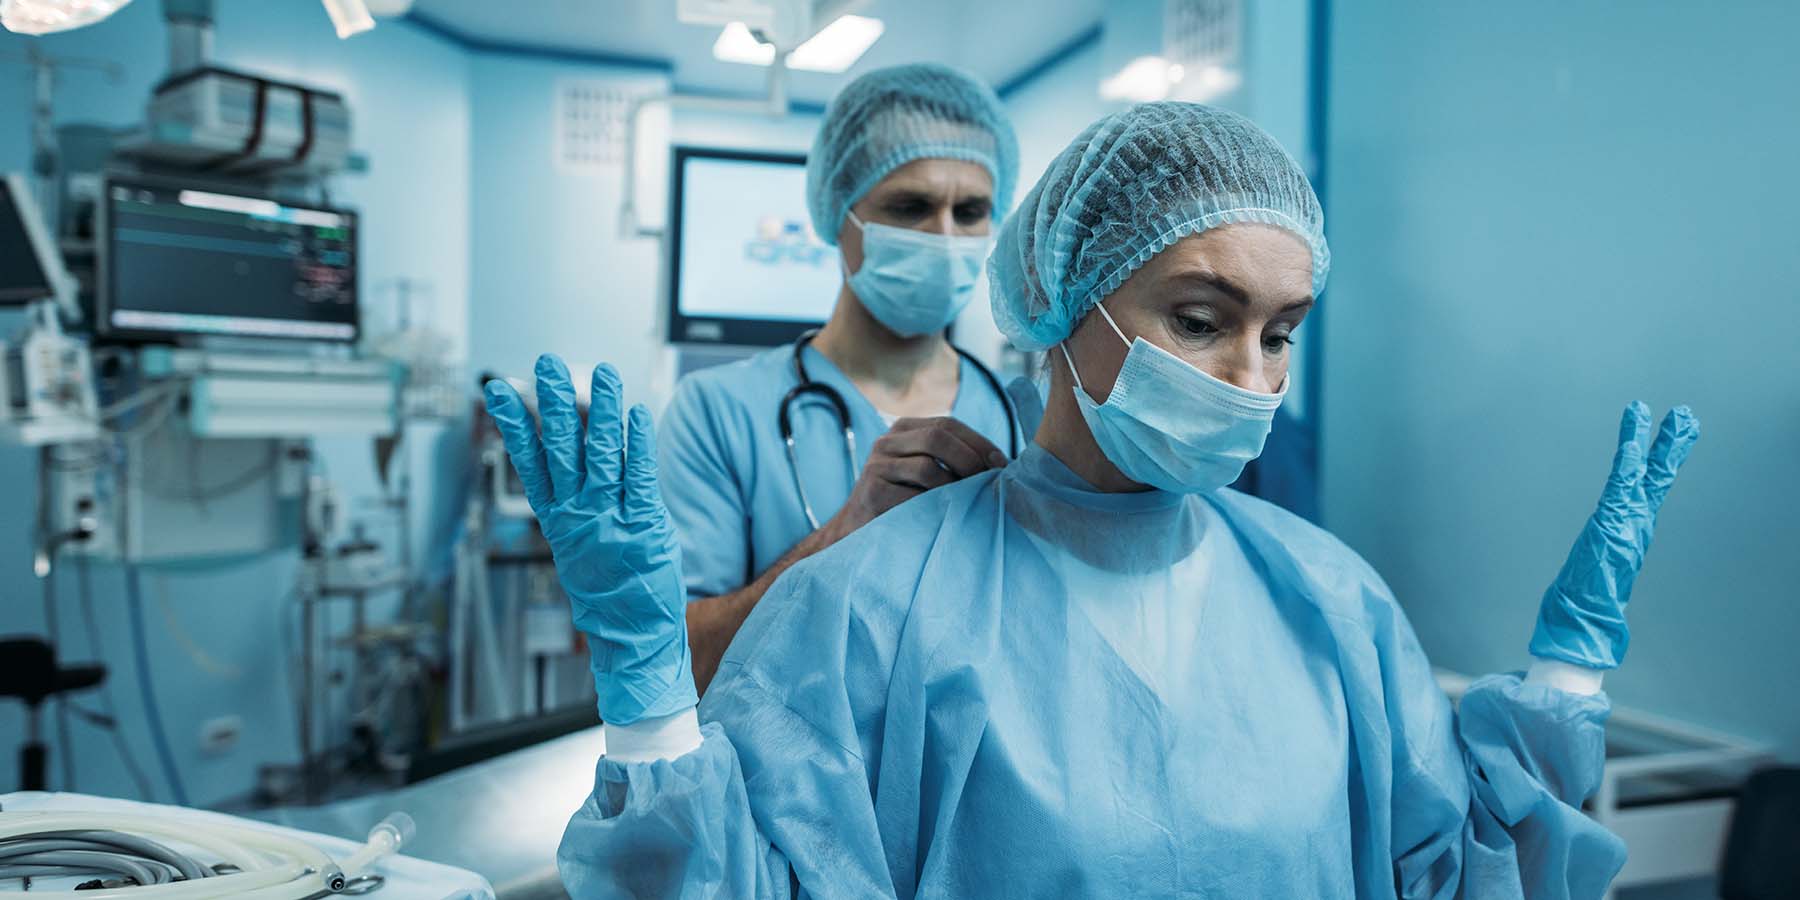 Surgeon preparing for operation in private hospital